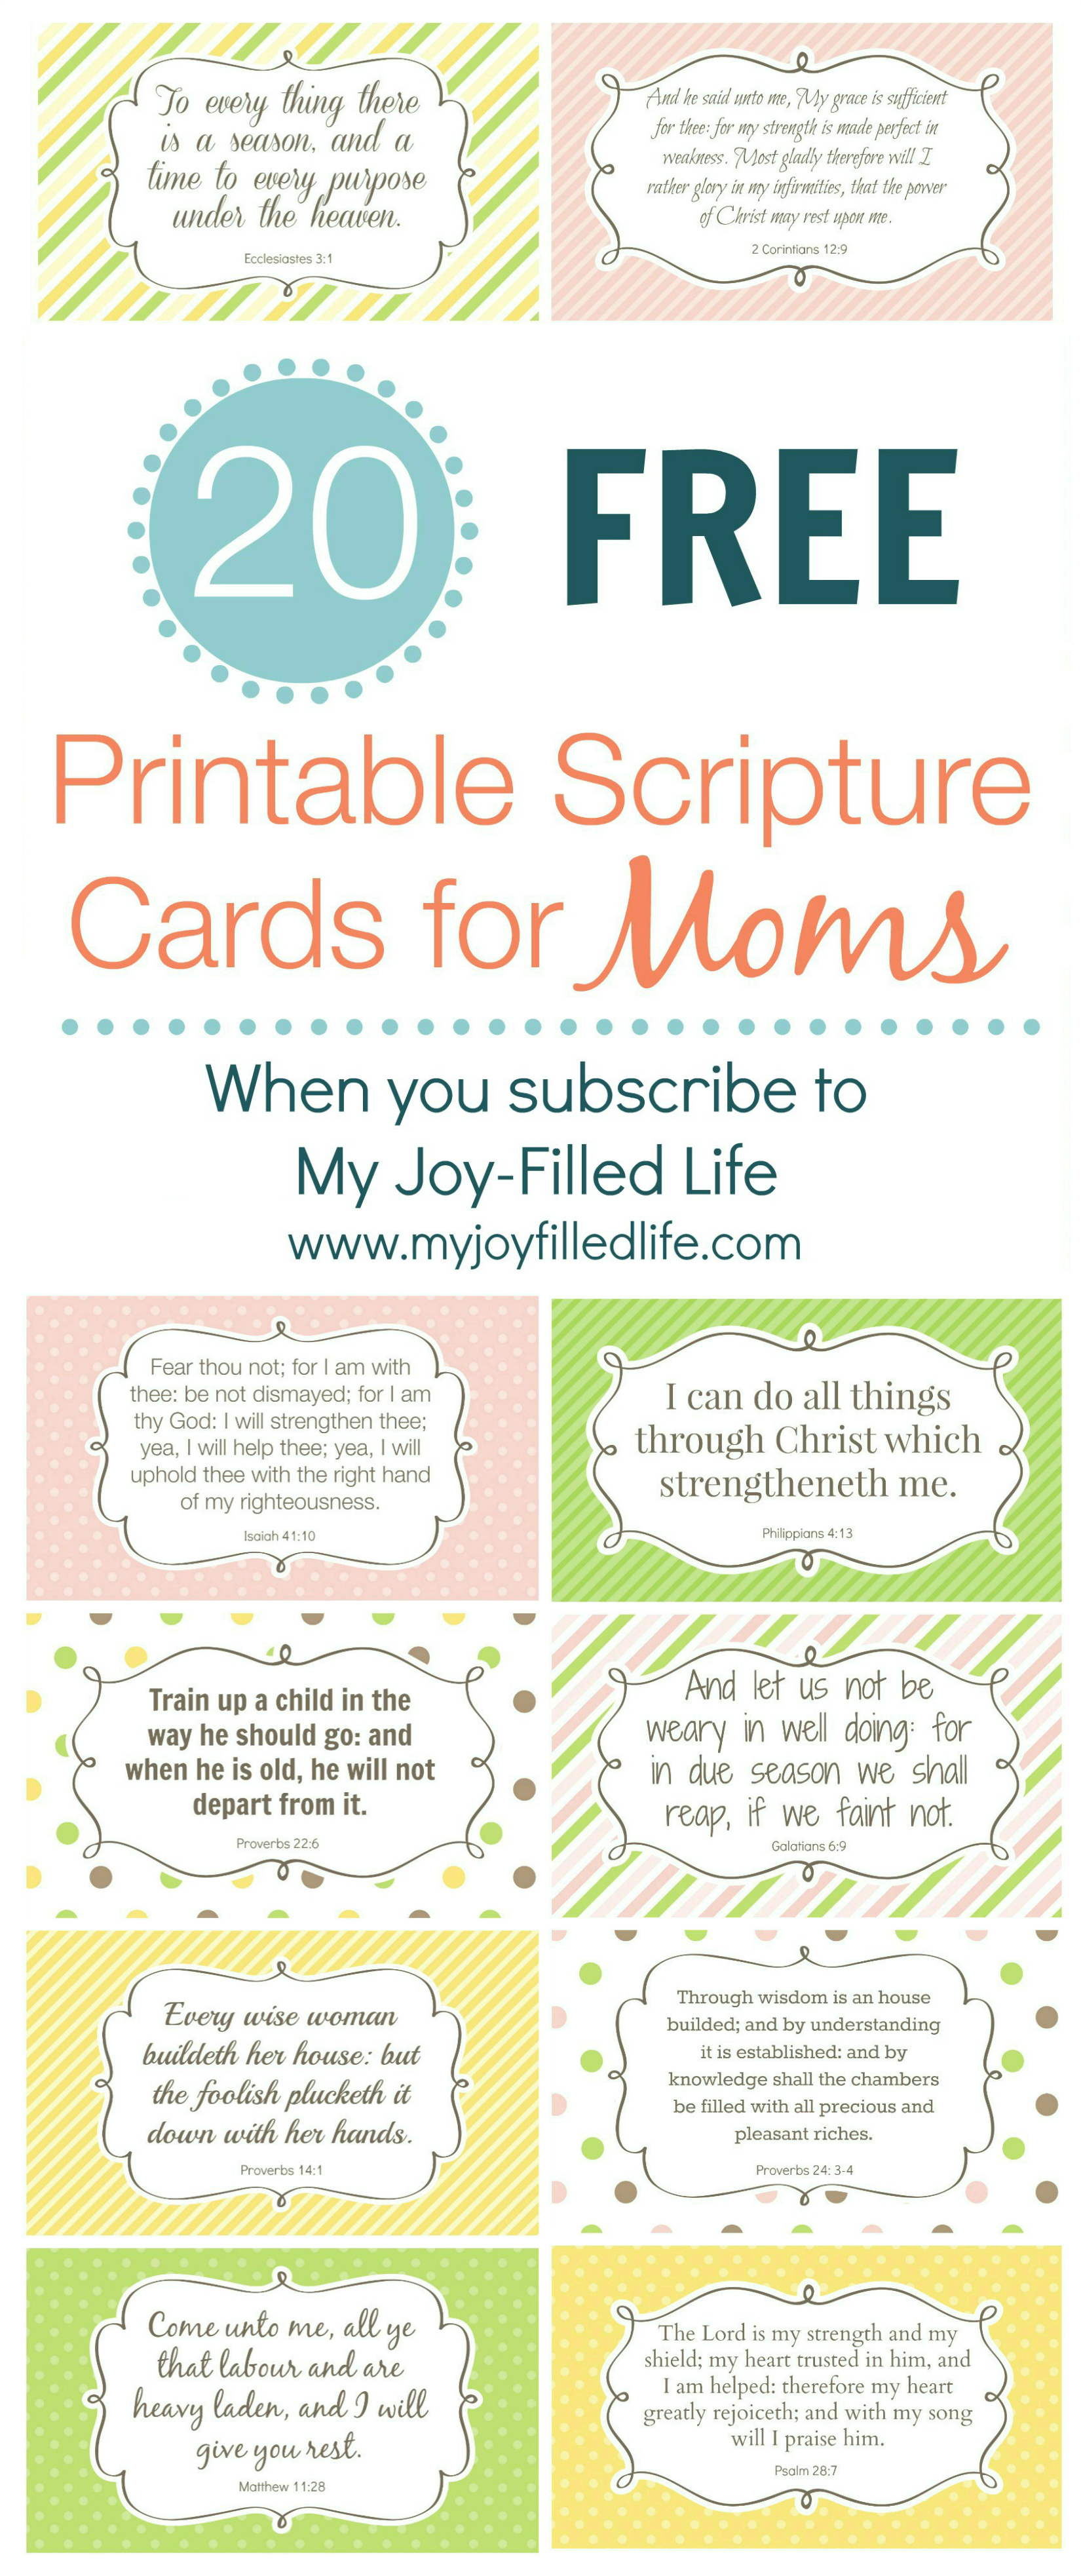 Encouragement For Moms - Free Printable Scripture Cards - Free Printable Inspirational Bible Verses